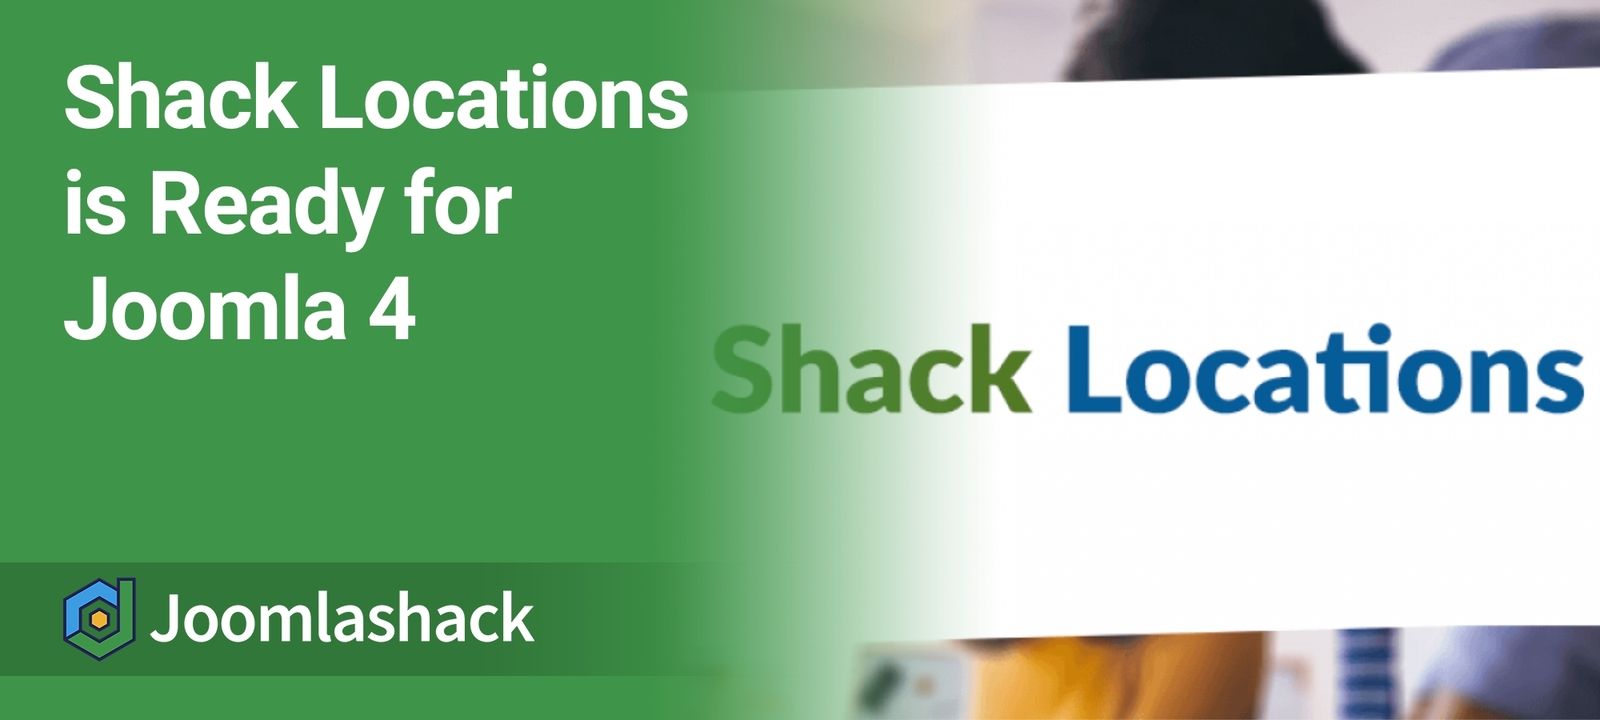 Shack Locations is Ready for Joomla 4